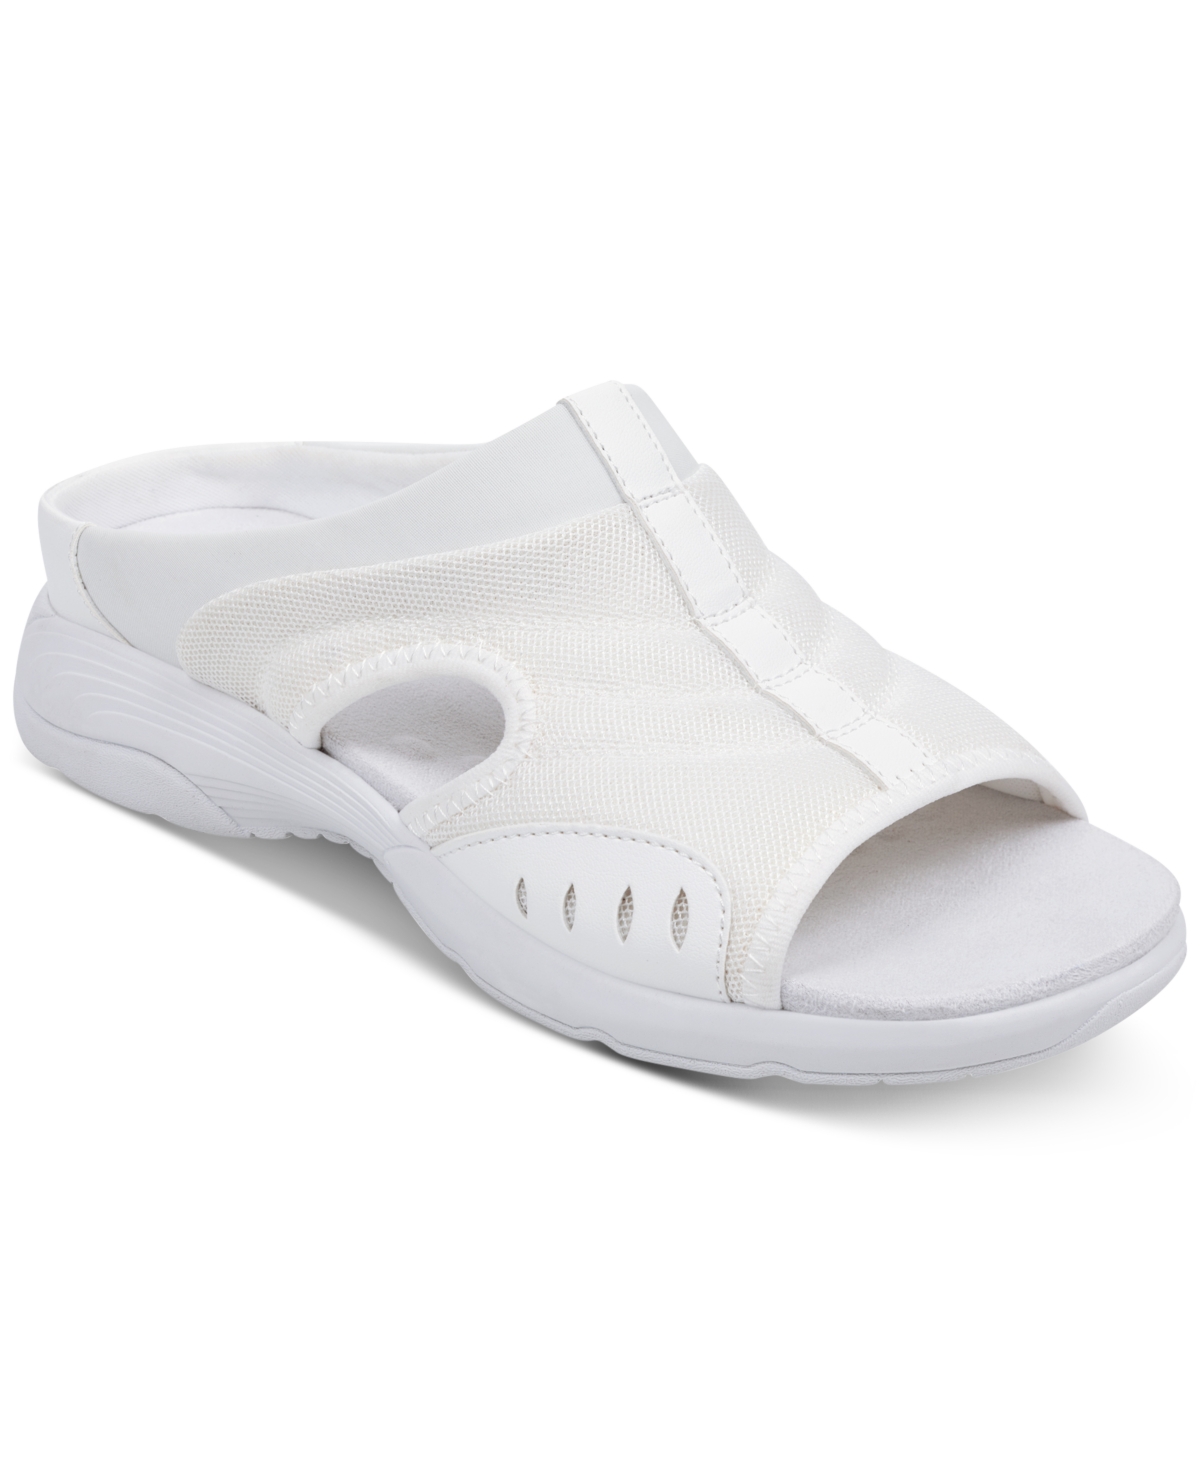 UPC 192733303999 product image for Easy Spirit Women's Traciee Square Toe Casual Slide Sandals Women's Shoes | upcitemdb.com